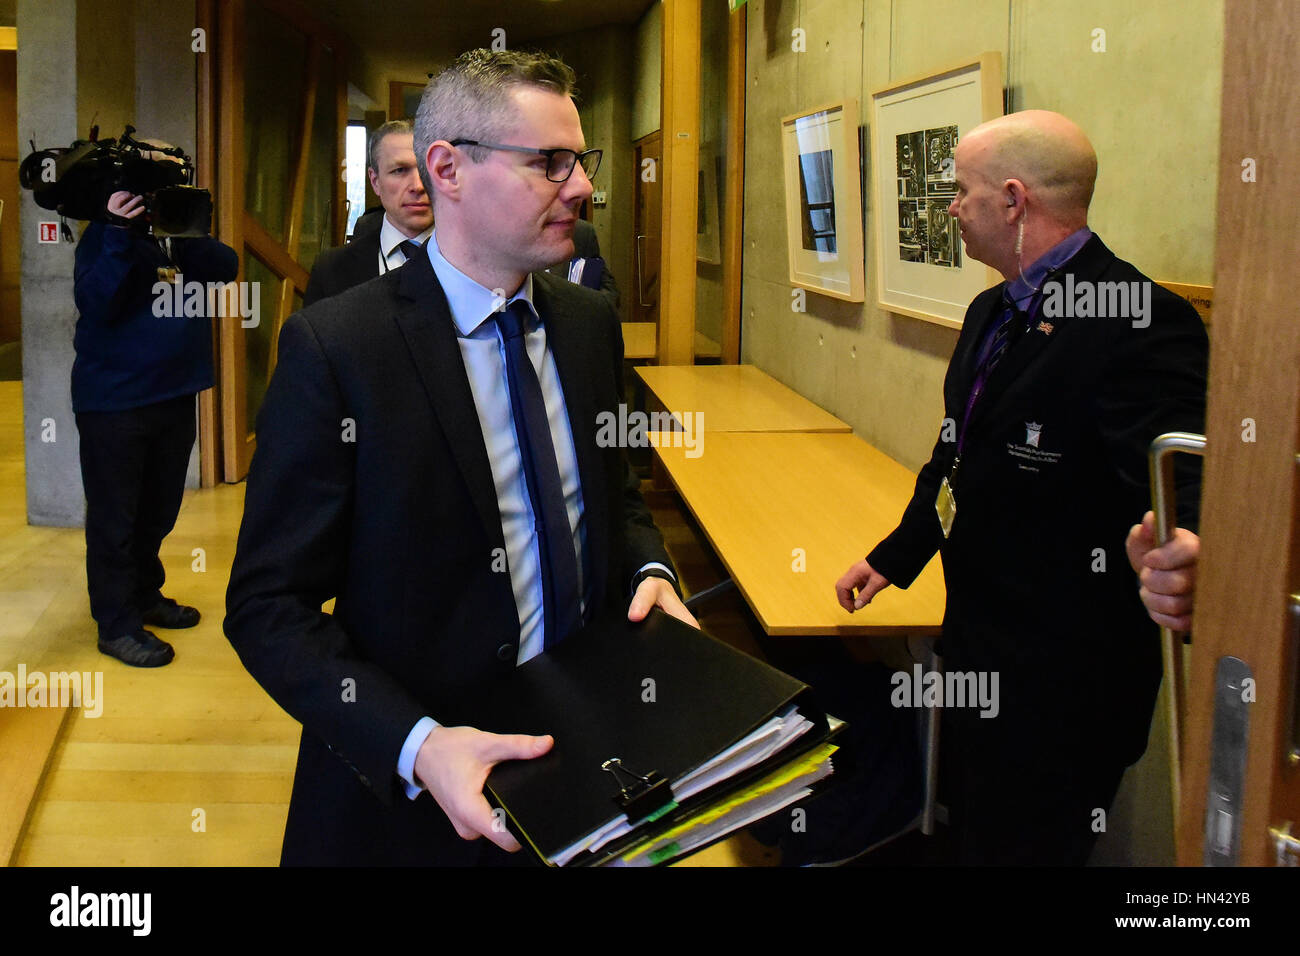 Edinburgh, UK. 8th Feb, 2017. Cabinet Secretary for Finance Derek Mackay arrives to give evidence to the Finance and Constitution Committee of the Scottish Parliament, at the beginning of Stage Two of the Budget (Scotland) Bill, Credit: Ken Jack/Alamy Live News Stock Photo